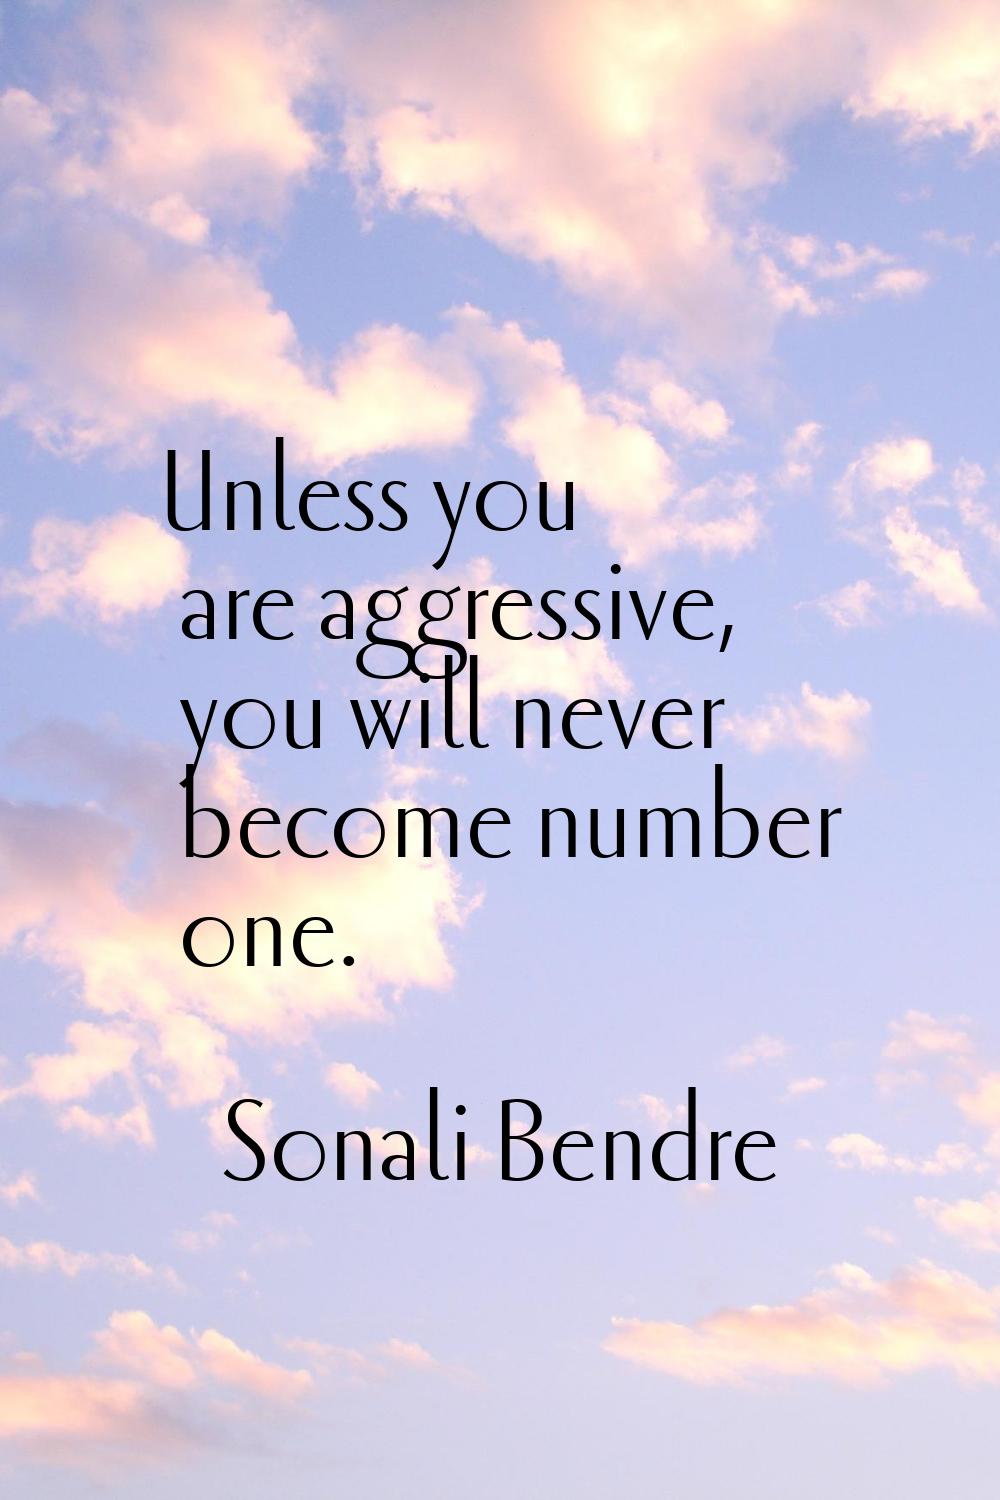 Unless you are aggressive, you will never become number one.